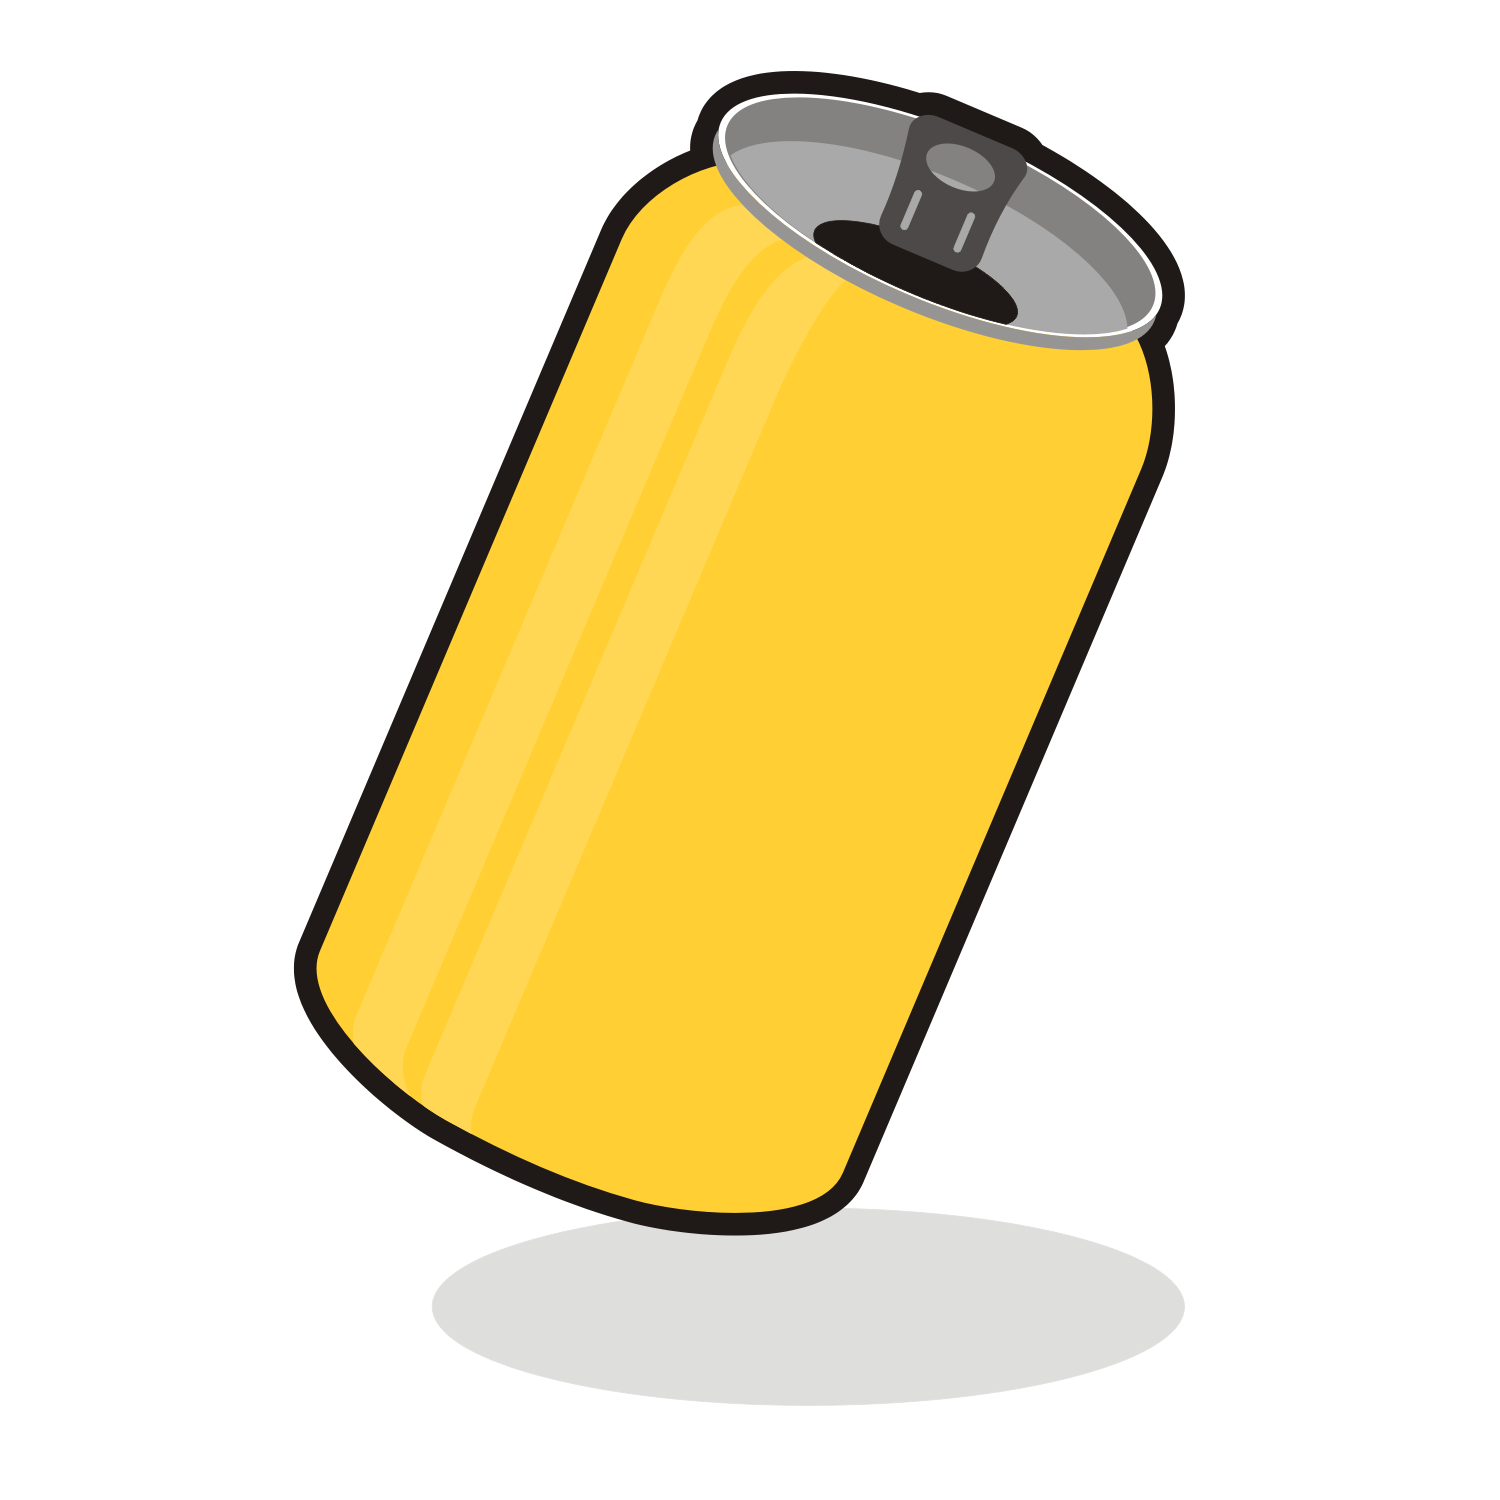 Vector for free use: 3D Pop Soda can